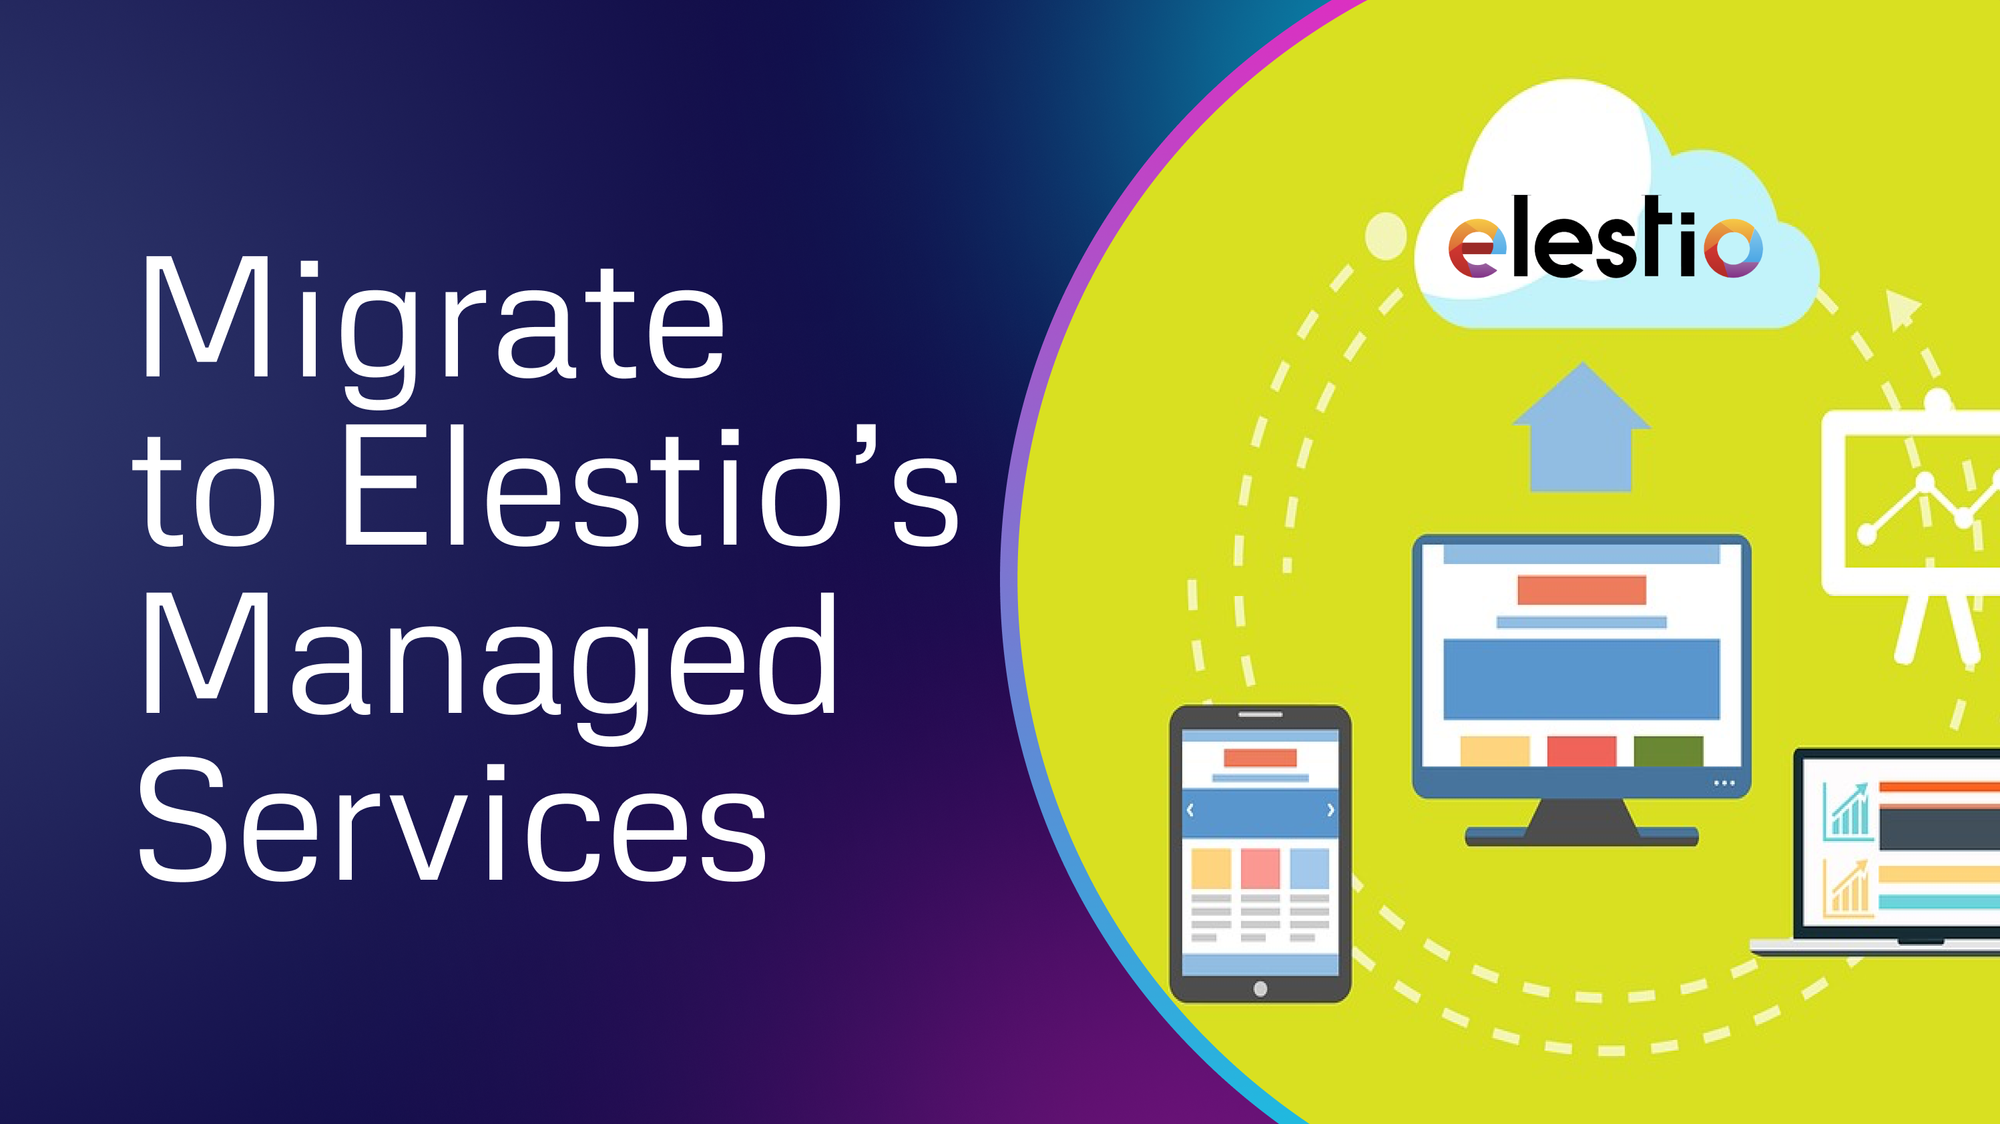 Migrate to Elestio's managed services